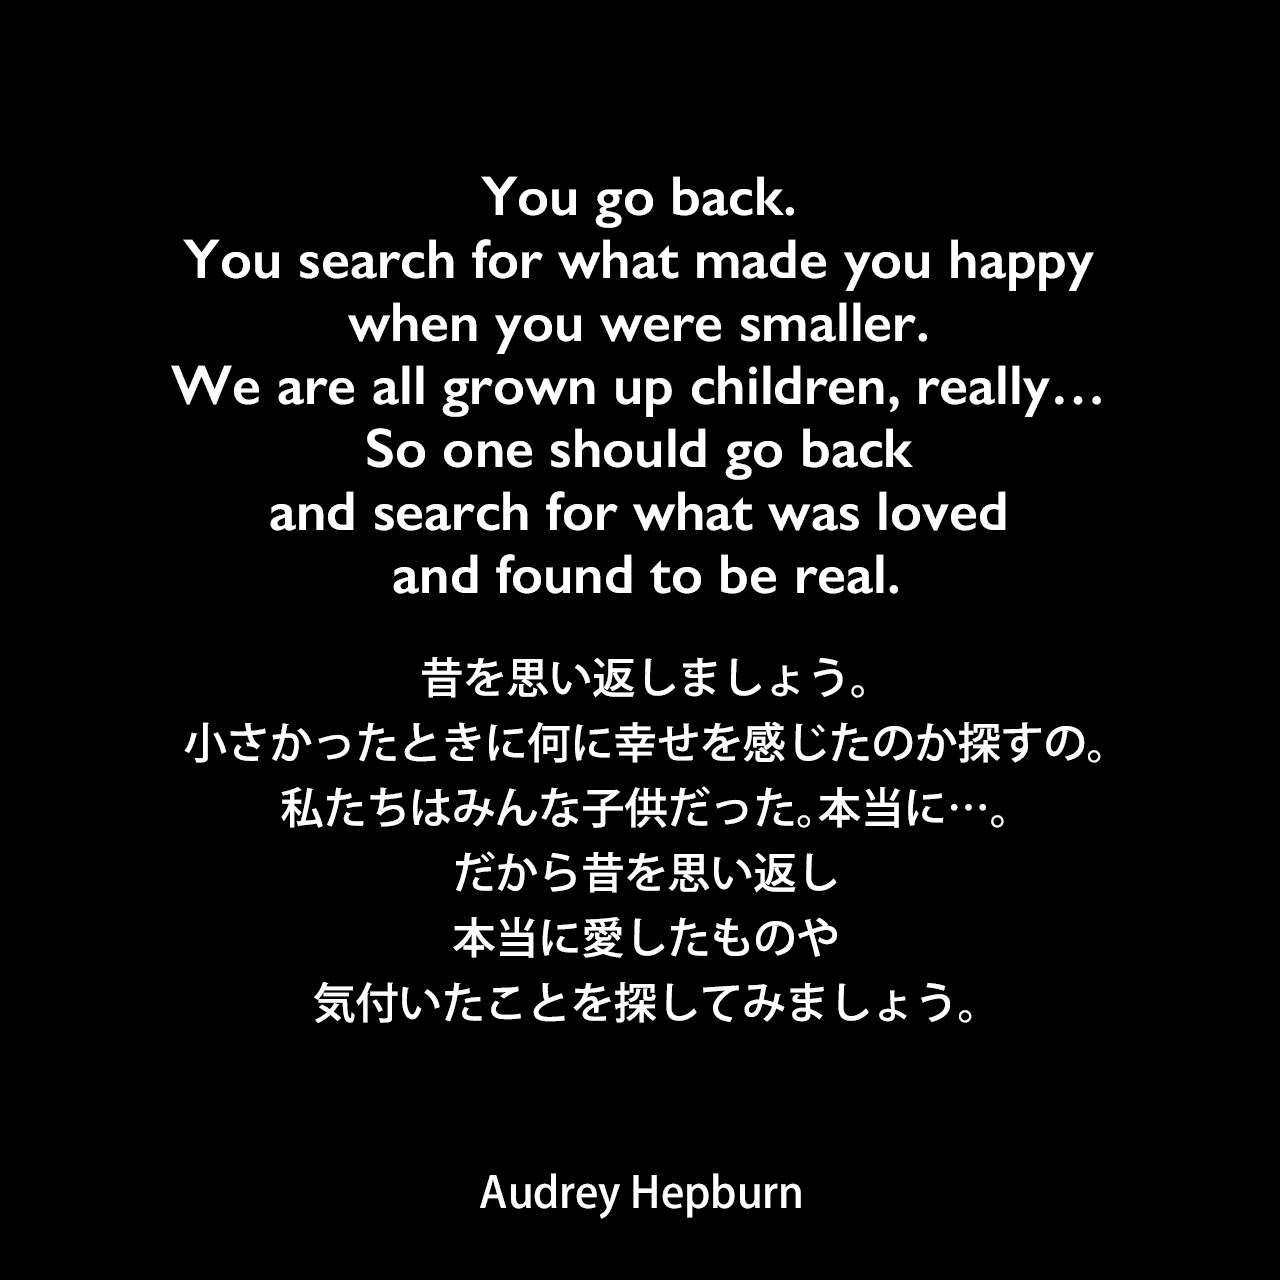 You go back. You search for what made you happy when you were smaller. We are all grown up children, really… So one should go back and search for what was loved and found to be real.昔を思い返しましょう。小さかったときに何に幸せを感じたのか探すの。私たちはみんな子供だった。本当に…。だから昔を思い返し、本当に愛したものや気付いたことを探してみましょう。